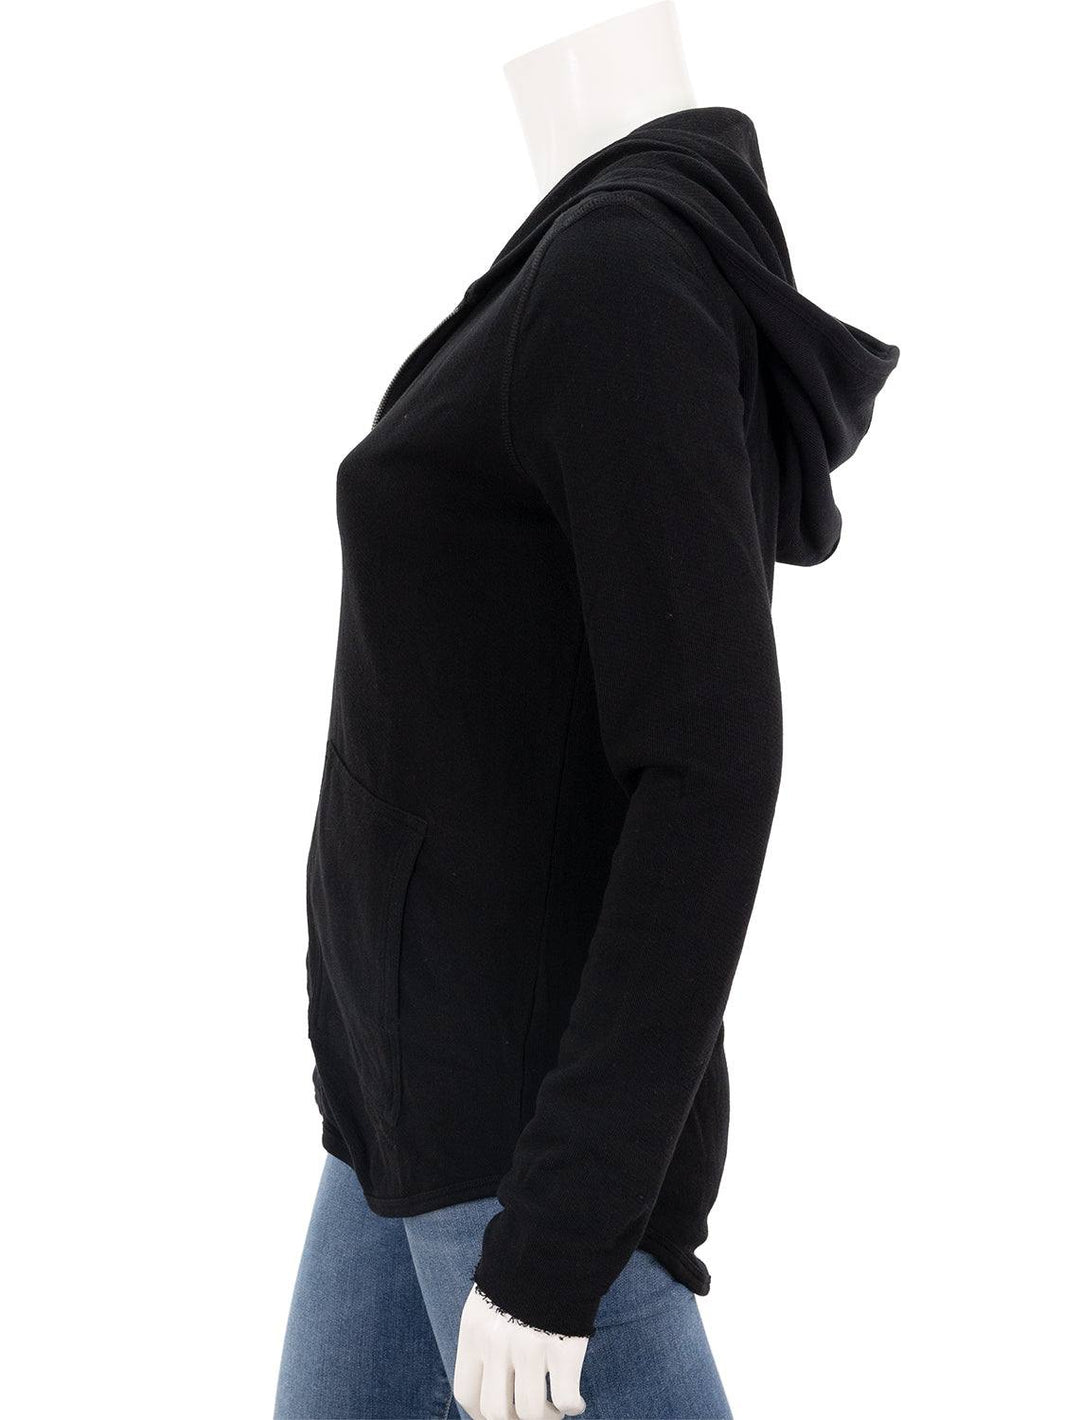 ATM french terry zip-up hoodie in black - Twigs